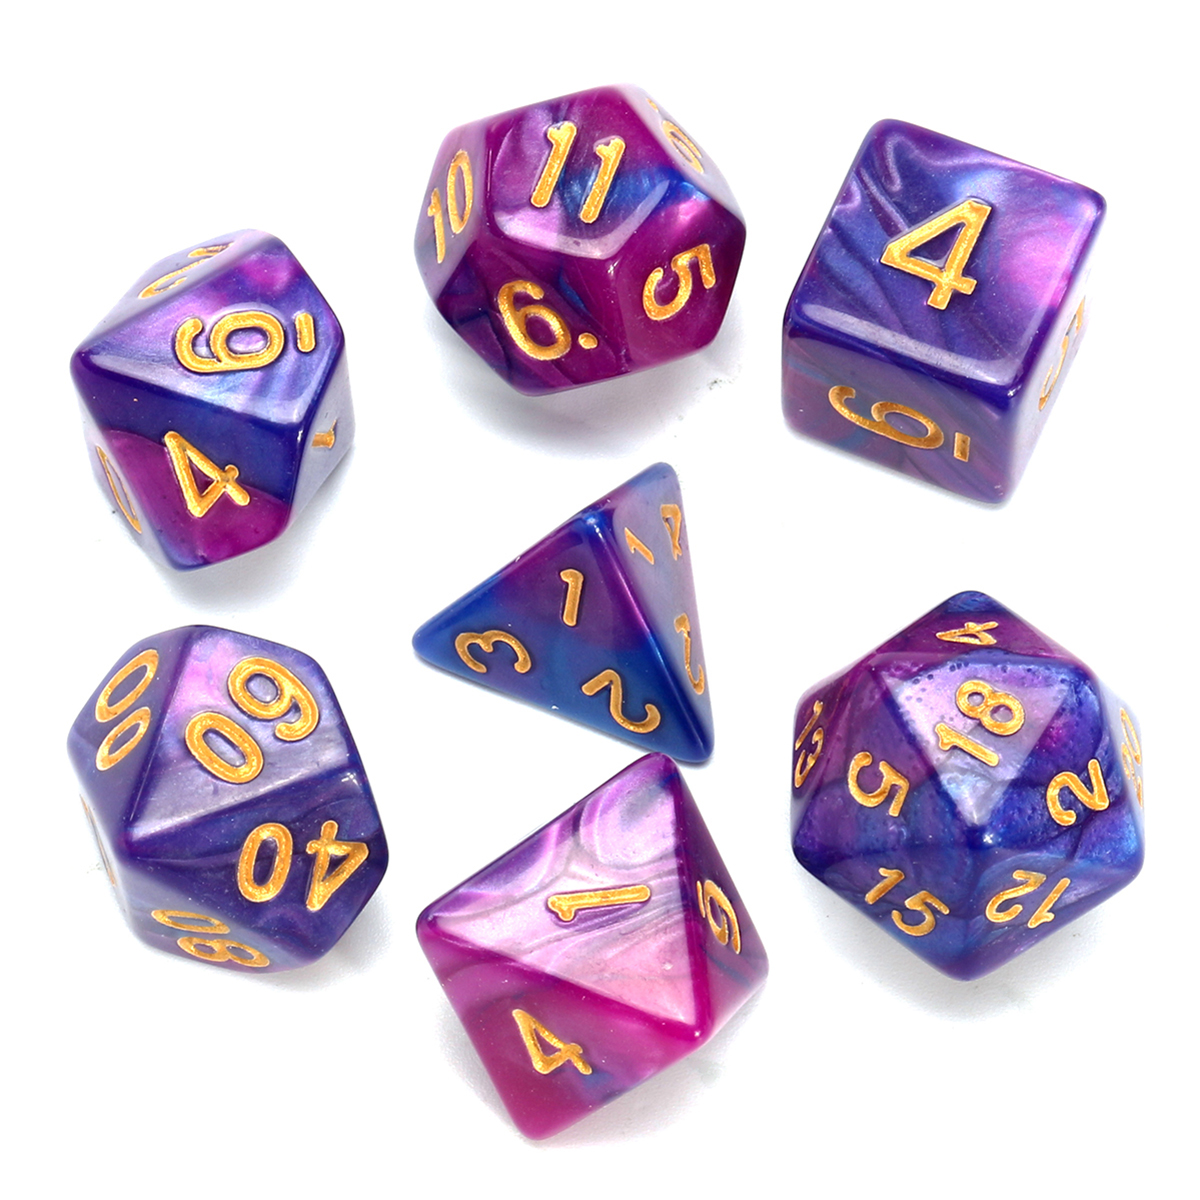 Pack of 14pcs Polyhedral Dice for D&D RPG MTG Party Game Toy Set Purple Pink 